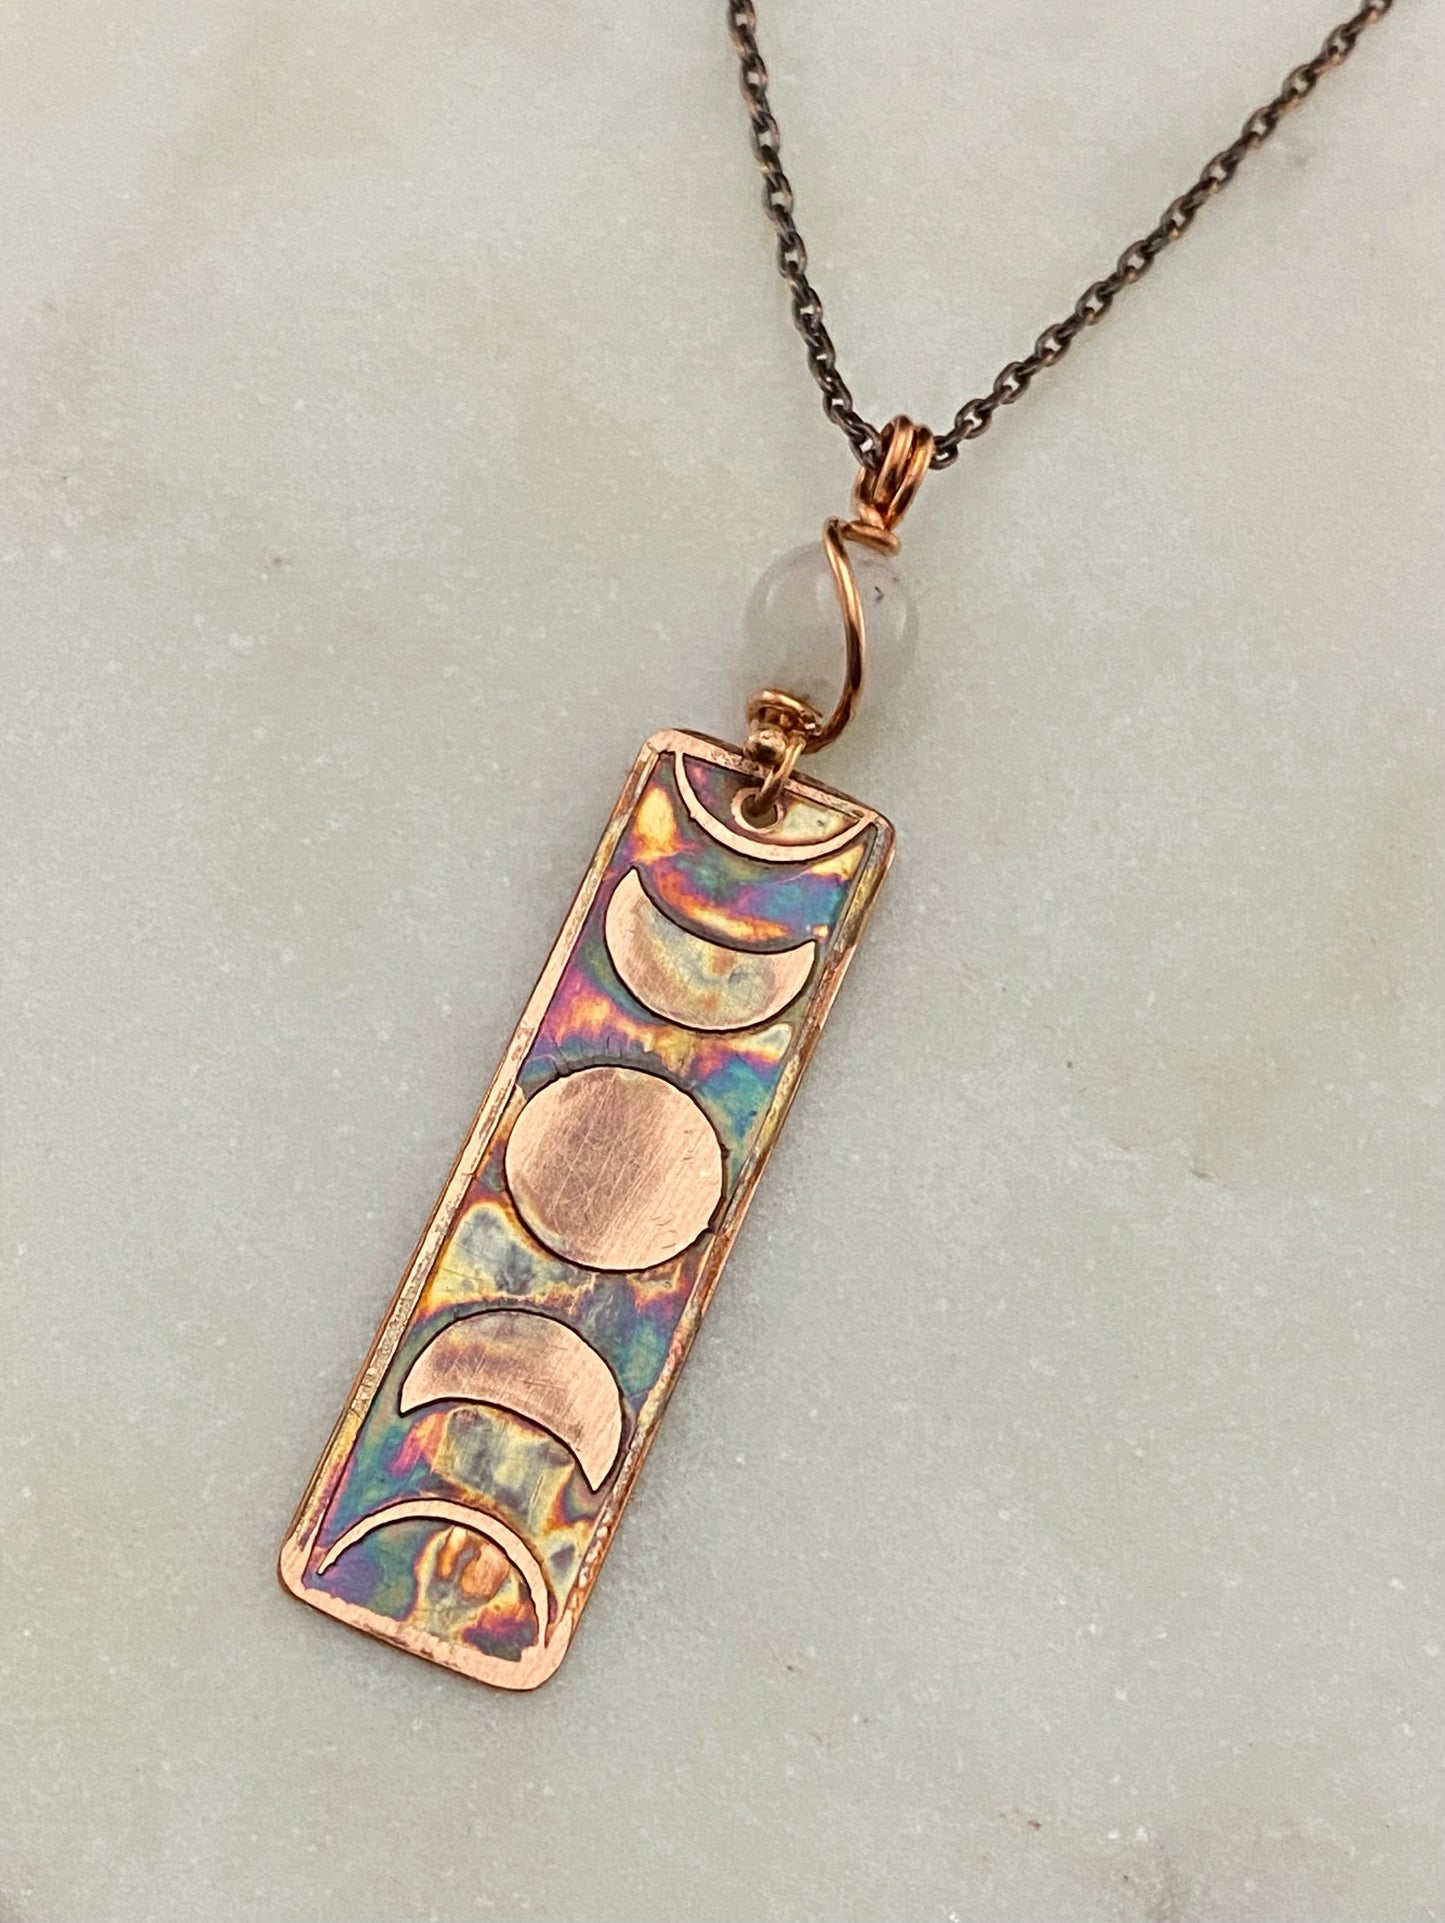 Moon phase acid etched copper necklace with Moonstone gemstone